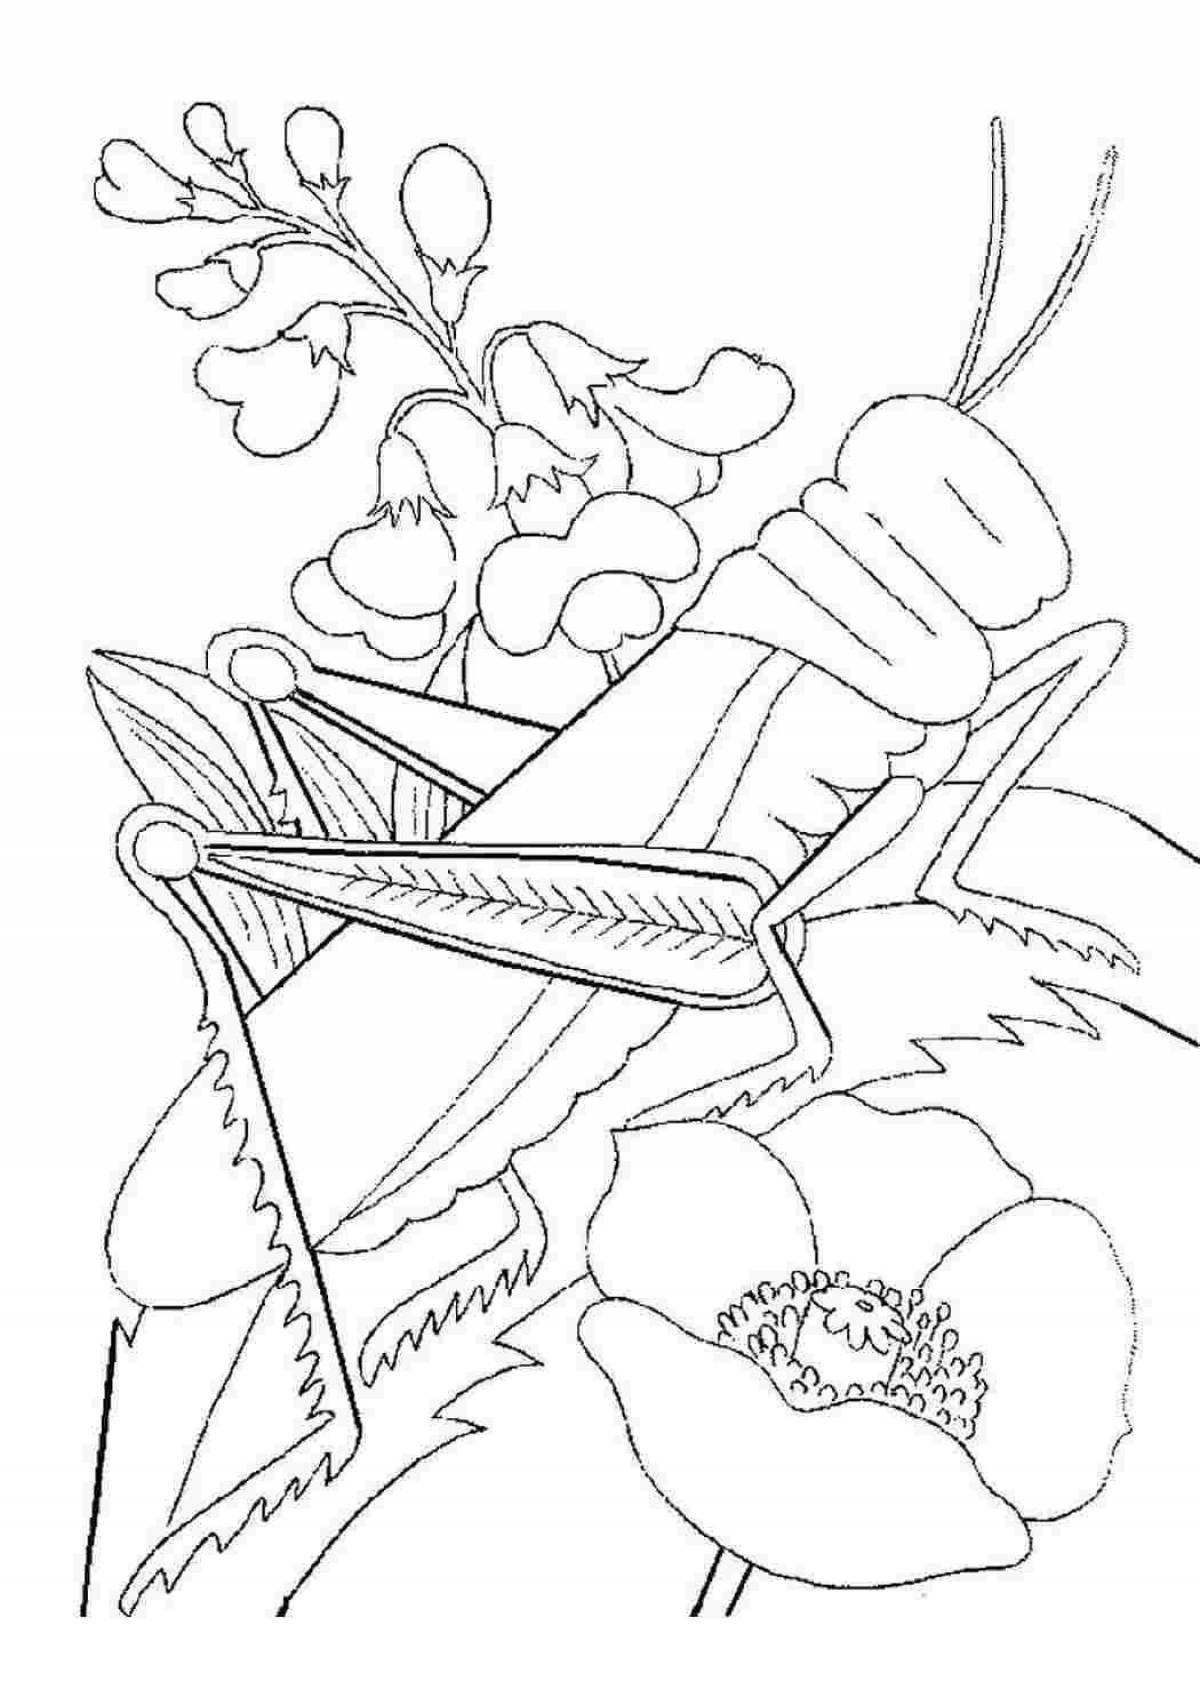 Fabulous cricket coloring page